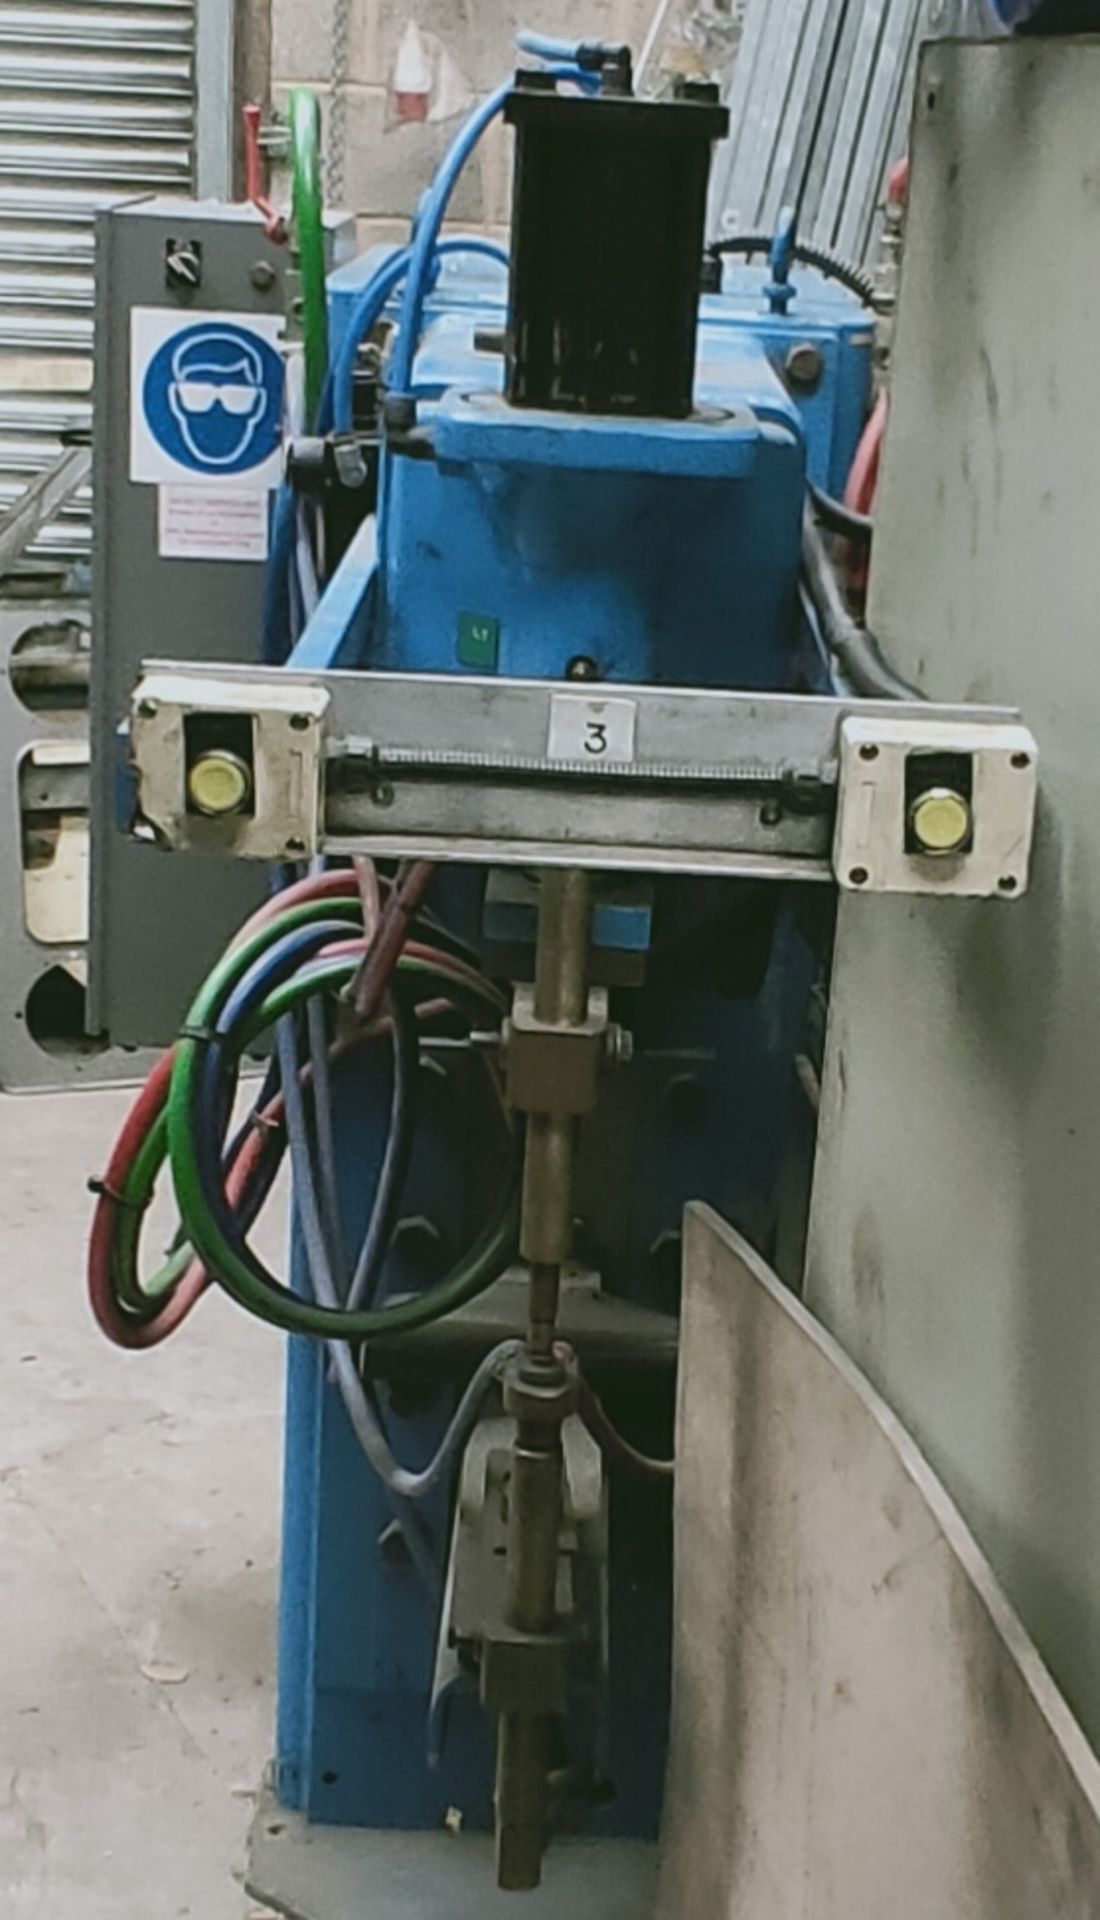 British Federal WS2000 Spot Welder, approx. 160cm x 180cm x 65cm, loading free of charge - yes ( - Image 3 of 5